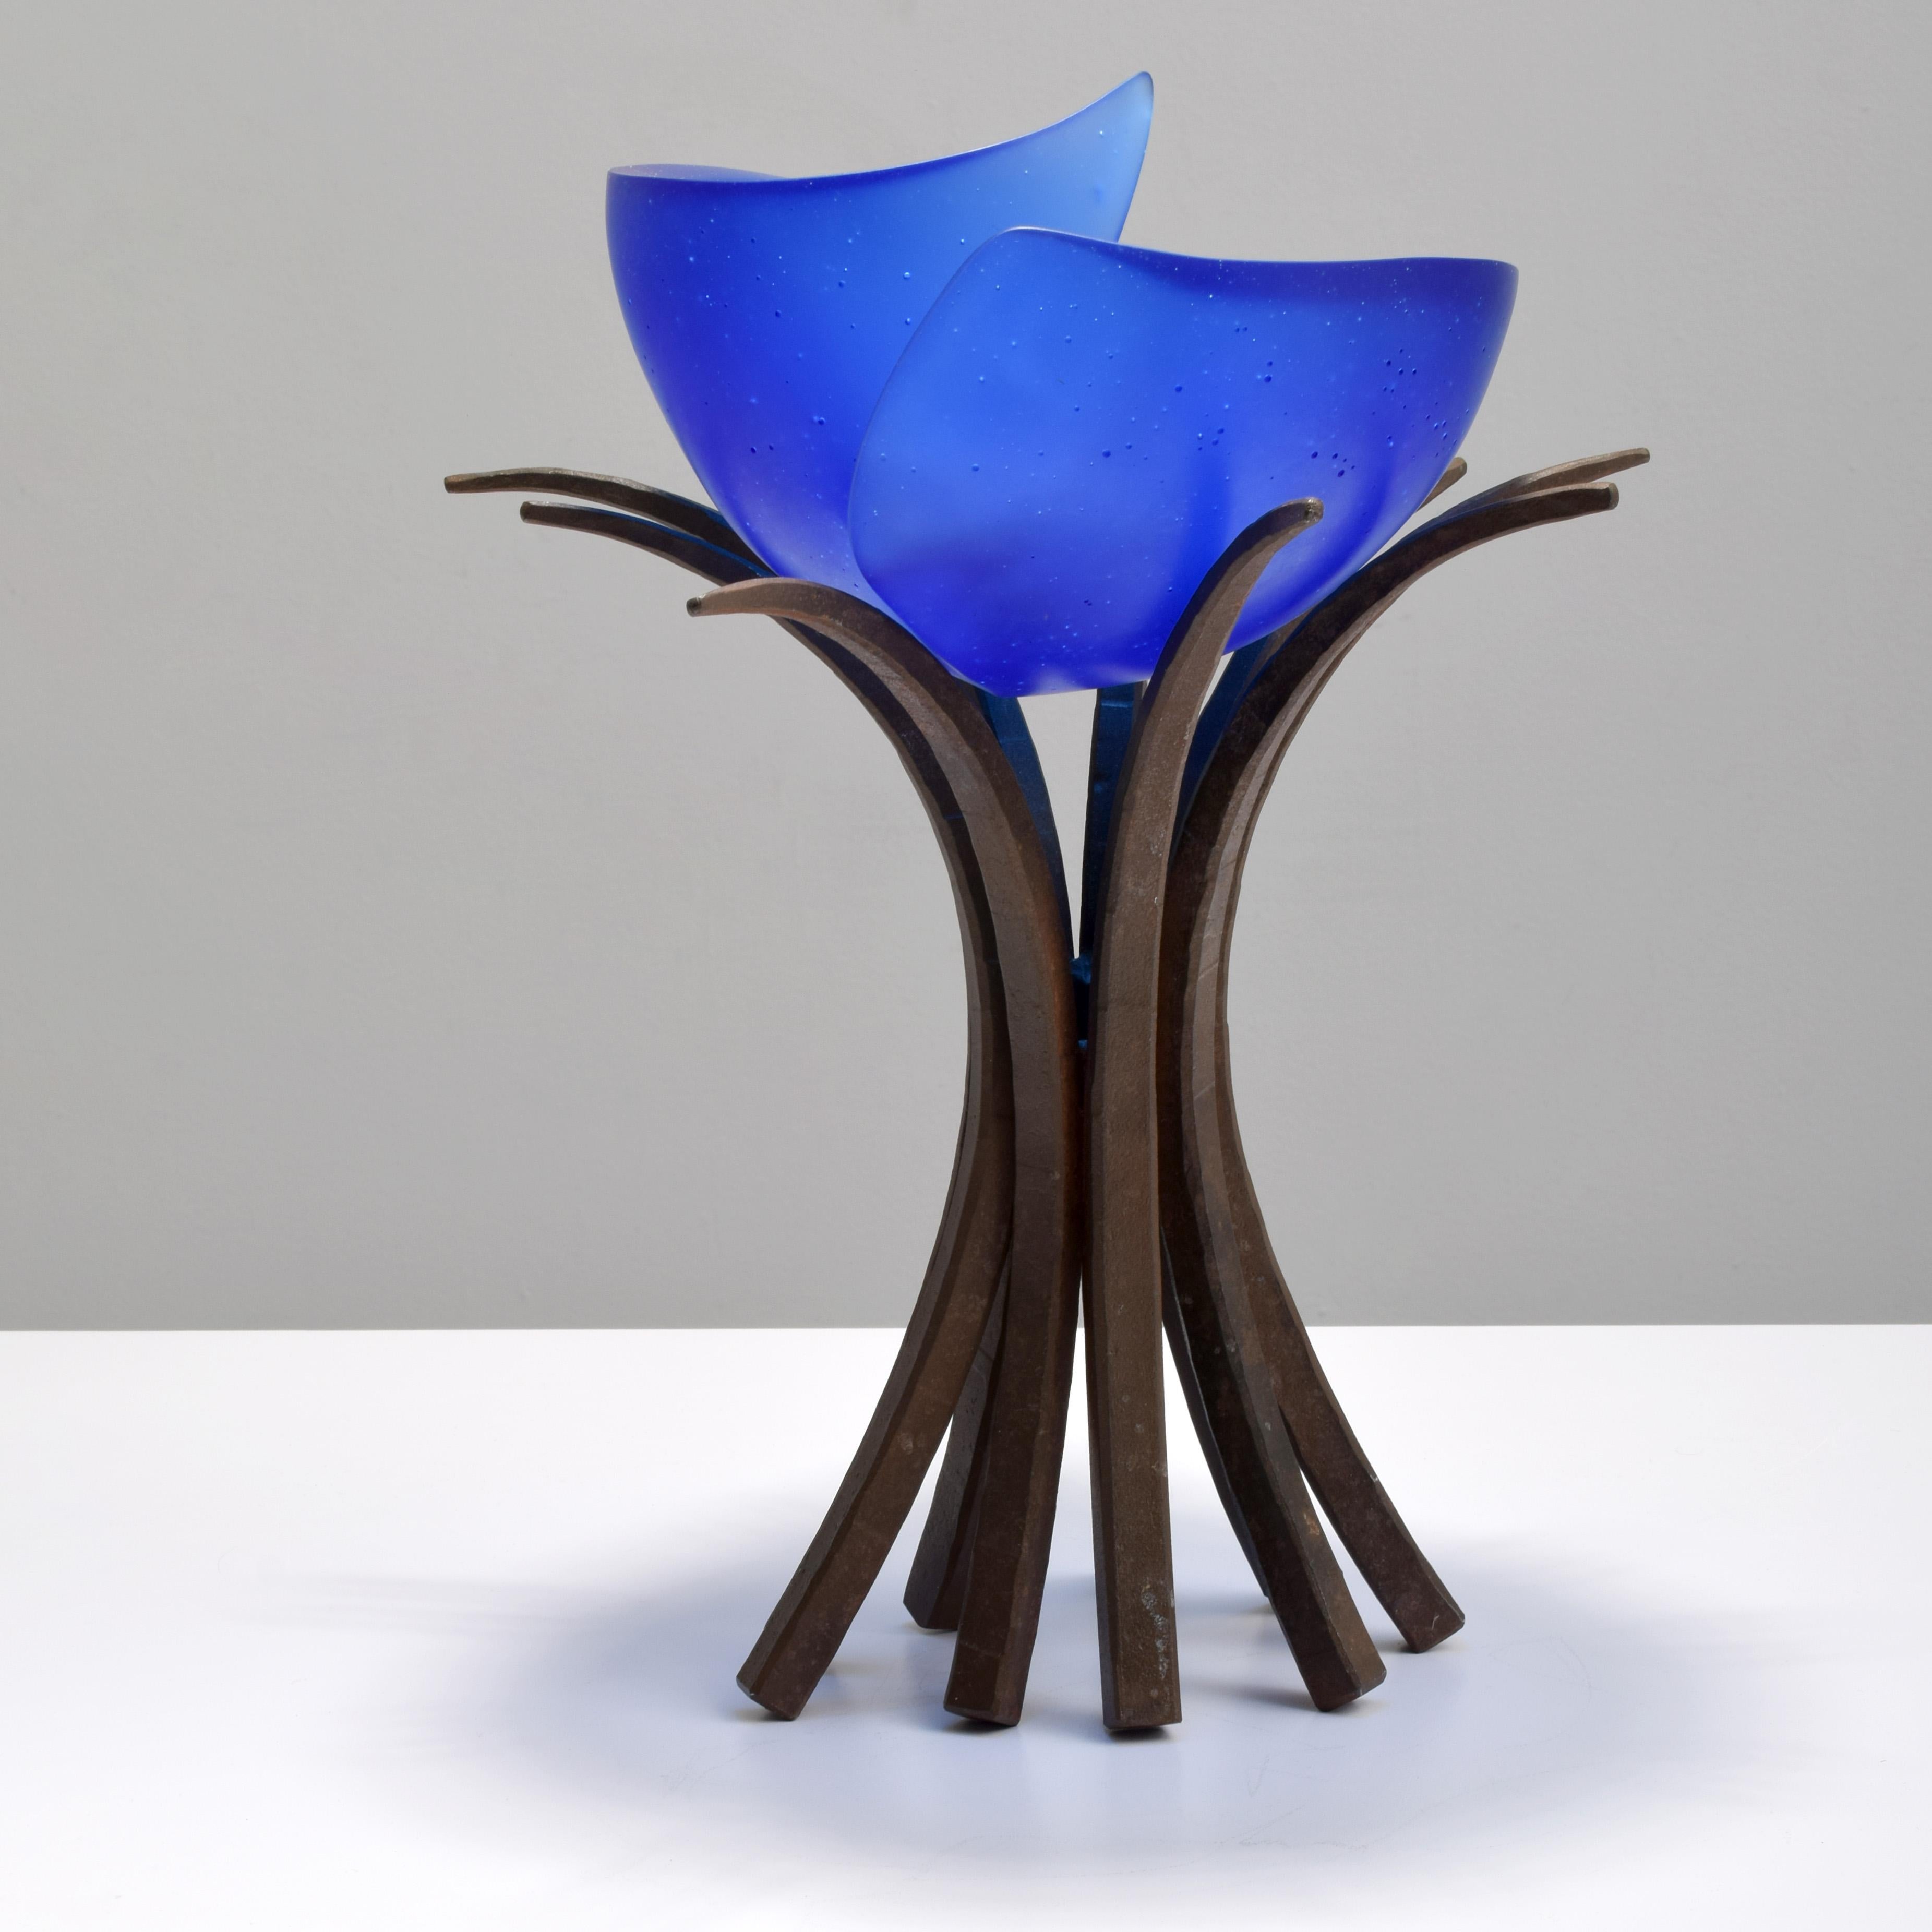 Additional Information: The sculpture is from the “Hemisphere Series” and was purchased directly from the artist’s Memphis, Tennessee studio.

Marking(s); notes: signed, #121, marking(s); 2005

Country of origin; materials: USA; glass, metal